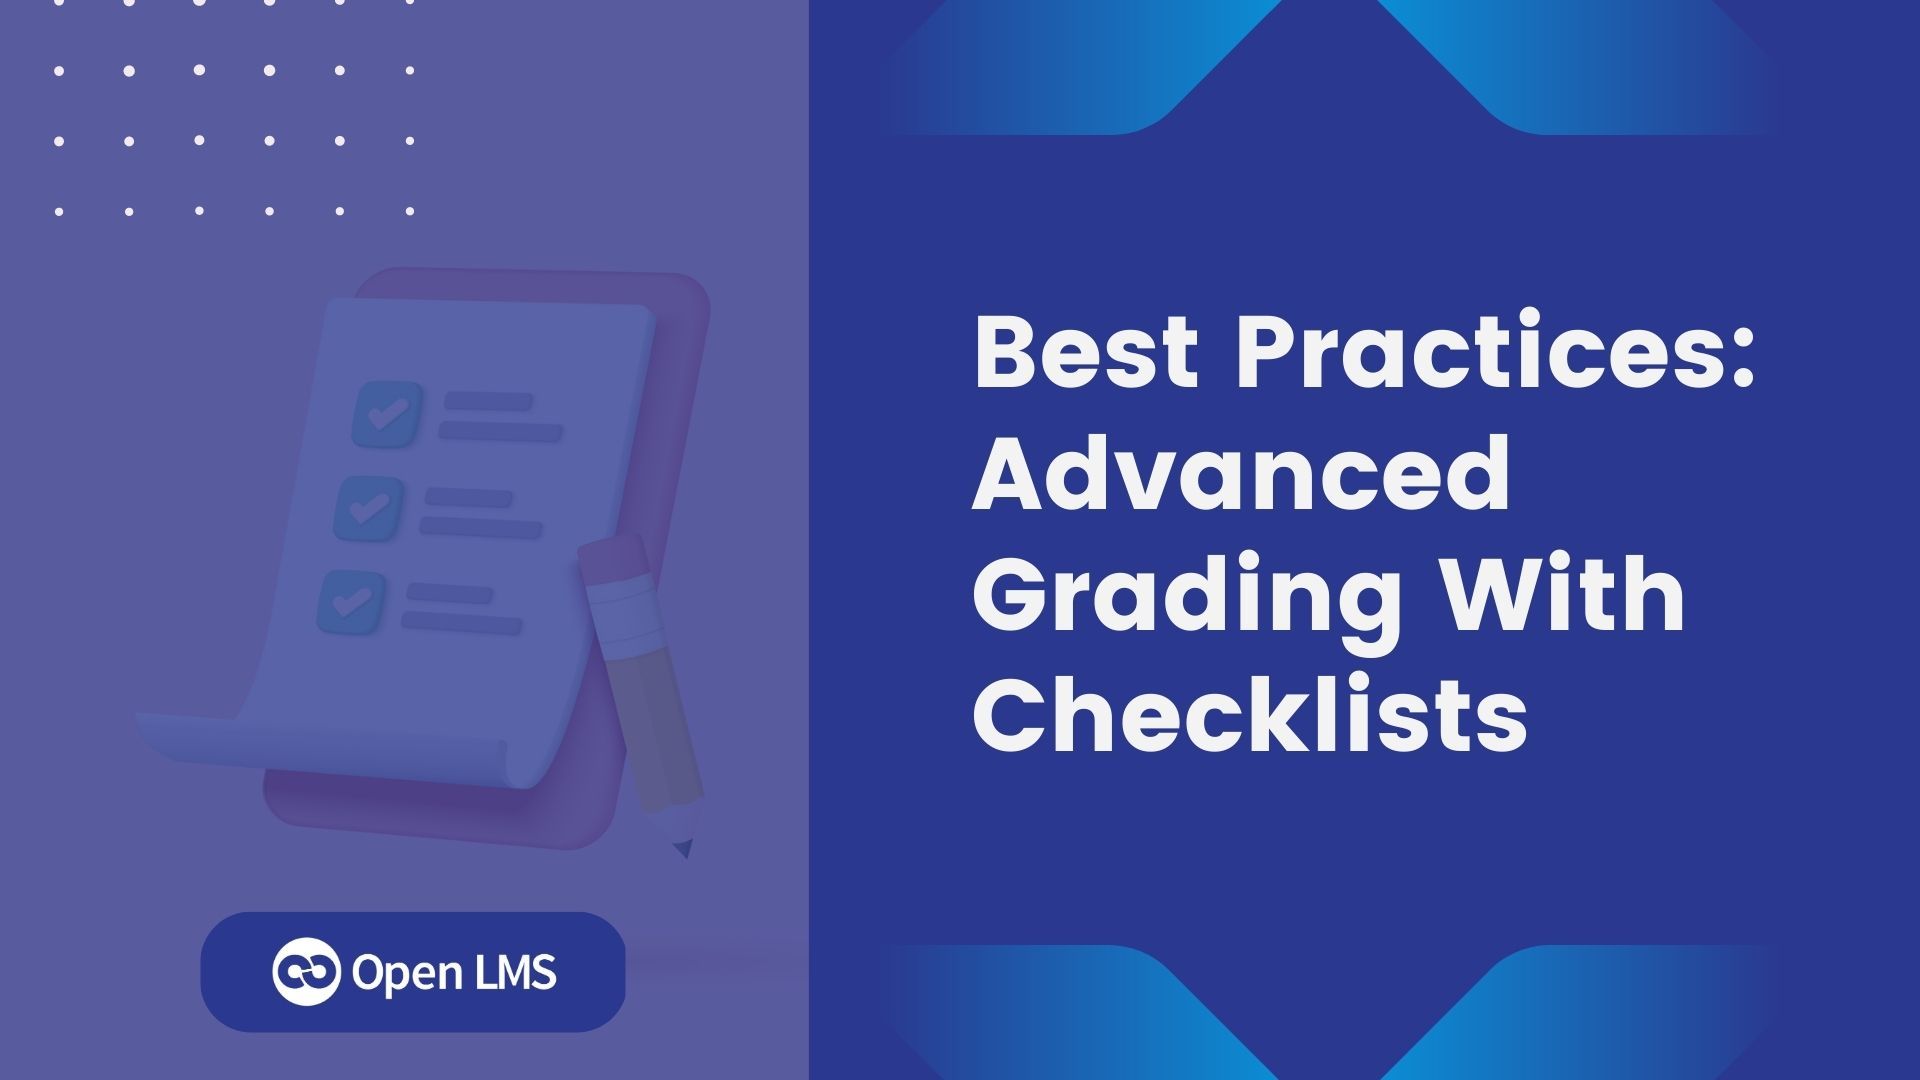 Best practices: Advanced grading with Checklists